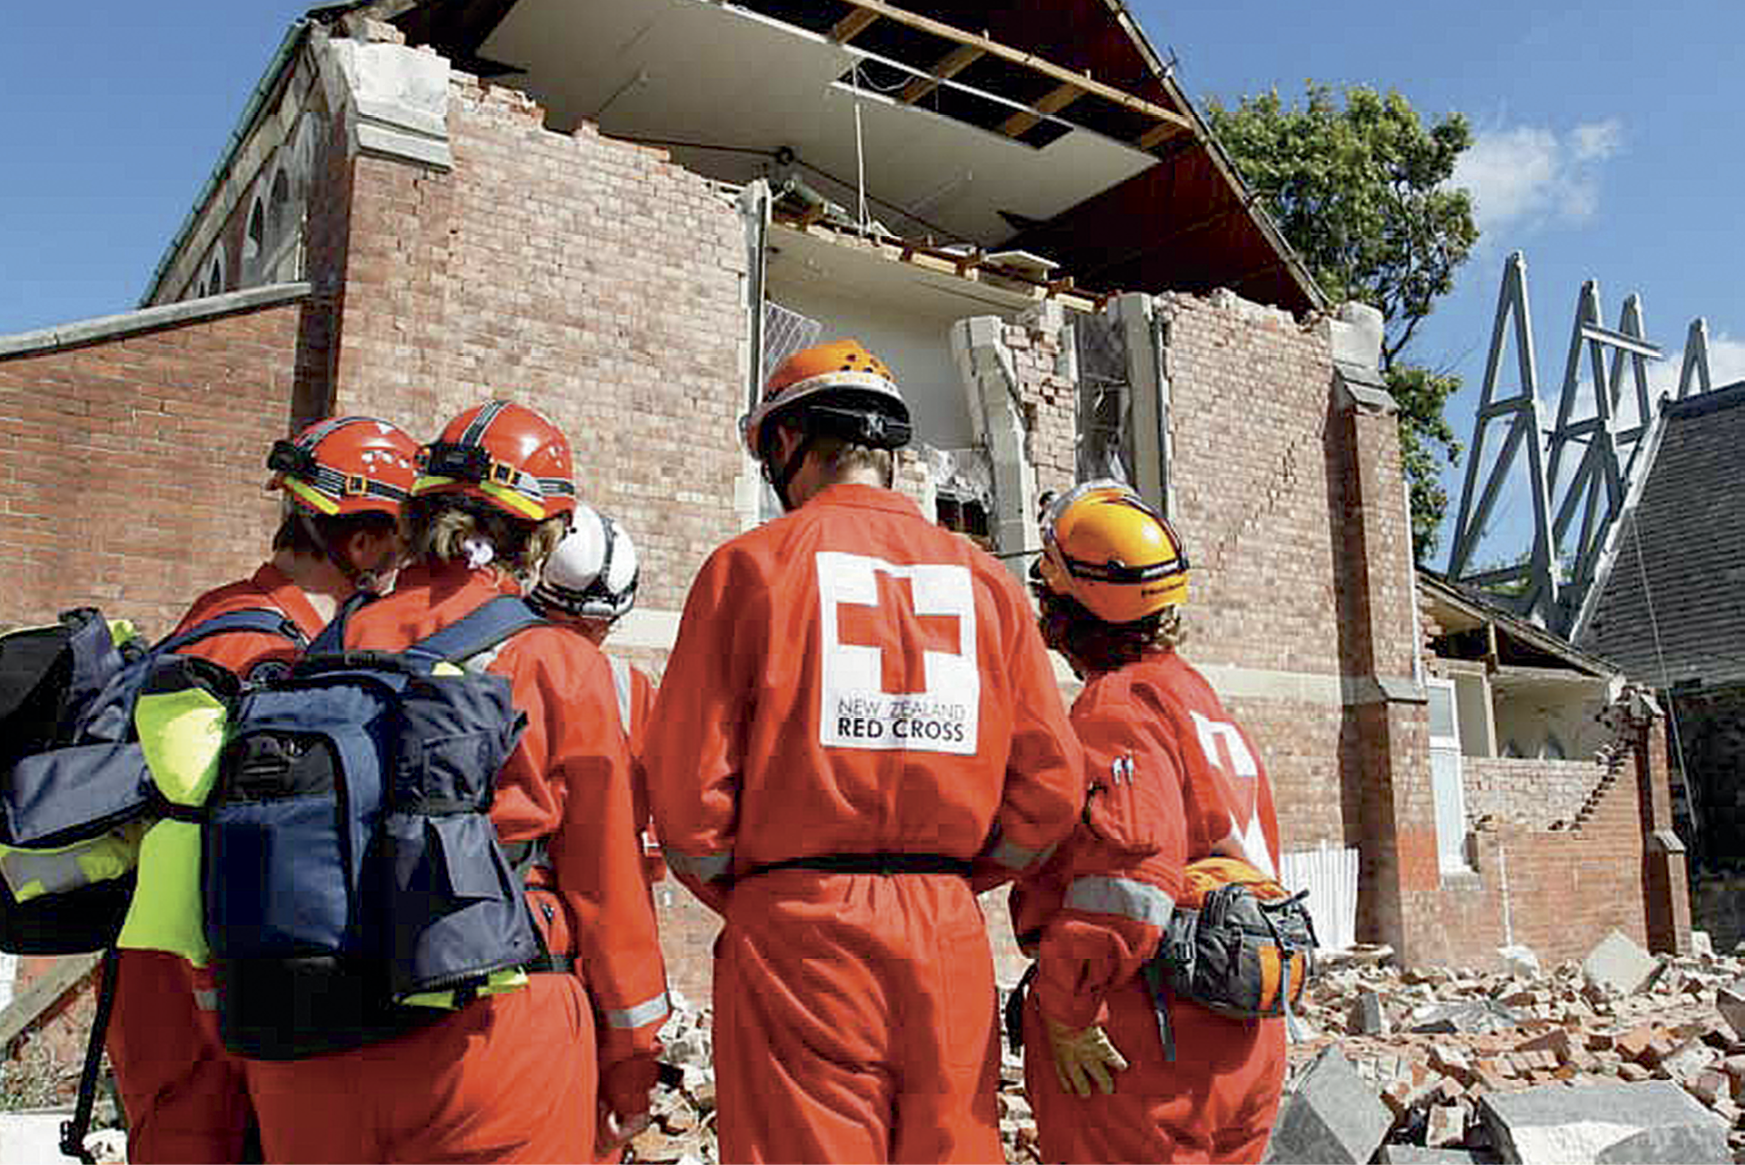 Photograph of team members in Red Cross uniforms and hard hats outside a damaged building